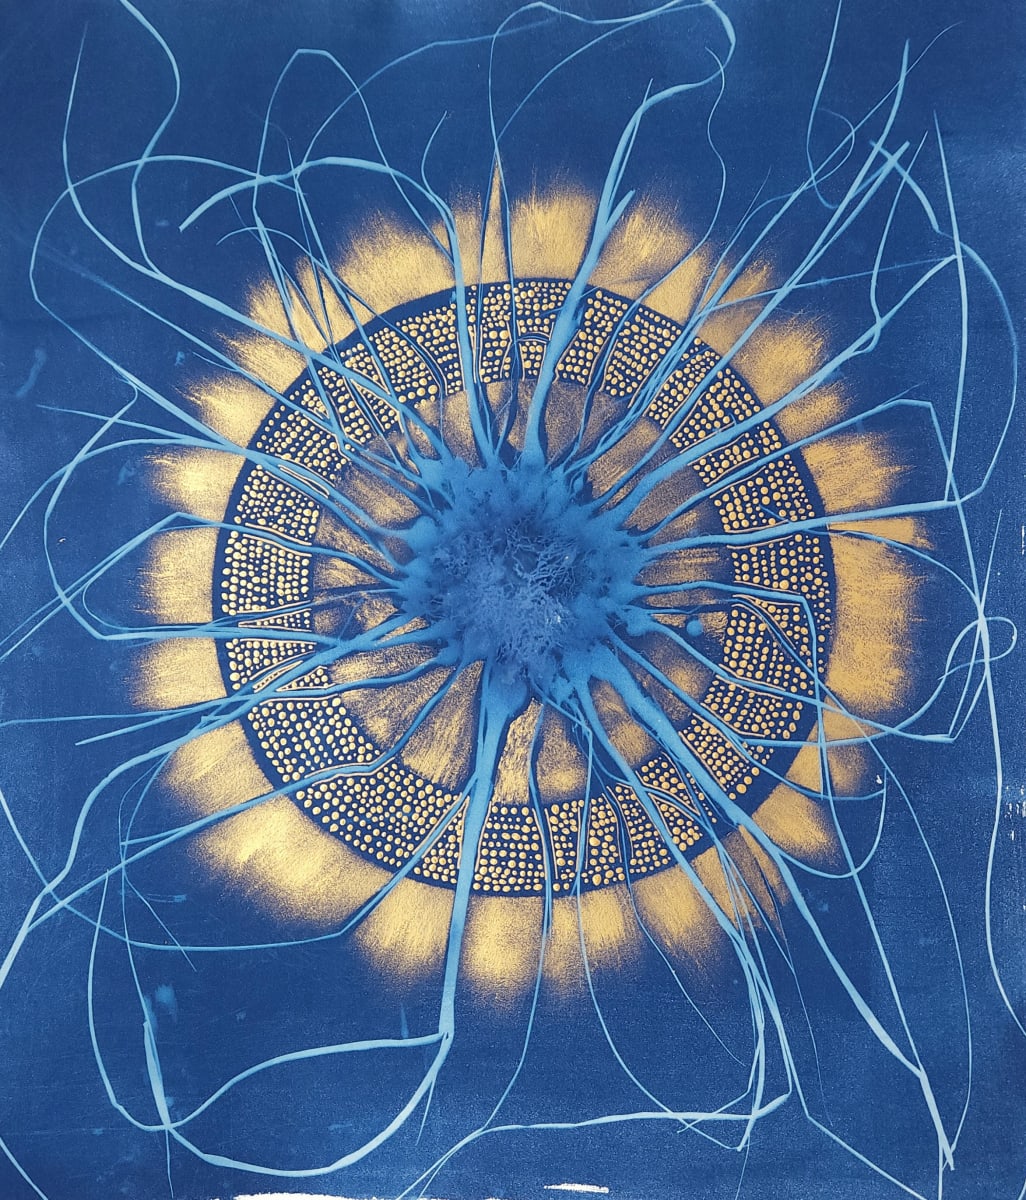 Equinox, Oak Spring I by Madge Evers  Image: cyanotype, ink, and acrylic, 20 x 18-inches; 2024
This image began as a cyanotype photogram created with Allium vineale I gathered at Oak Spring Garden Foundation artist residency in April of 2023. Wild and edible onion grass appears in early spring and online, there's lots of advice about how to eradicate it from one’s lawn.
Also available as a limited edition inkjet print.